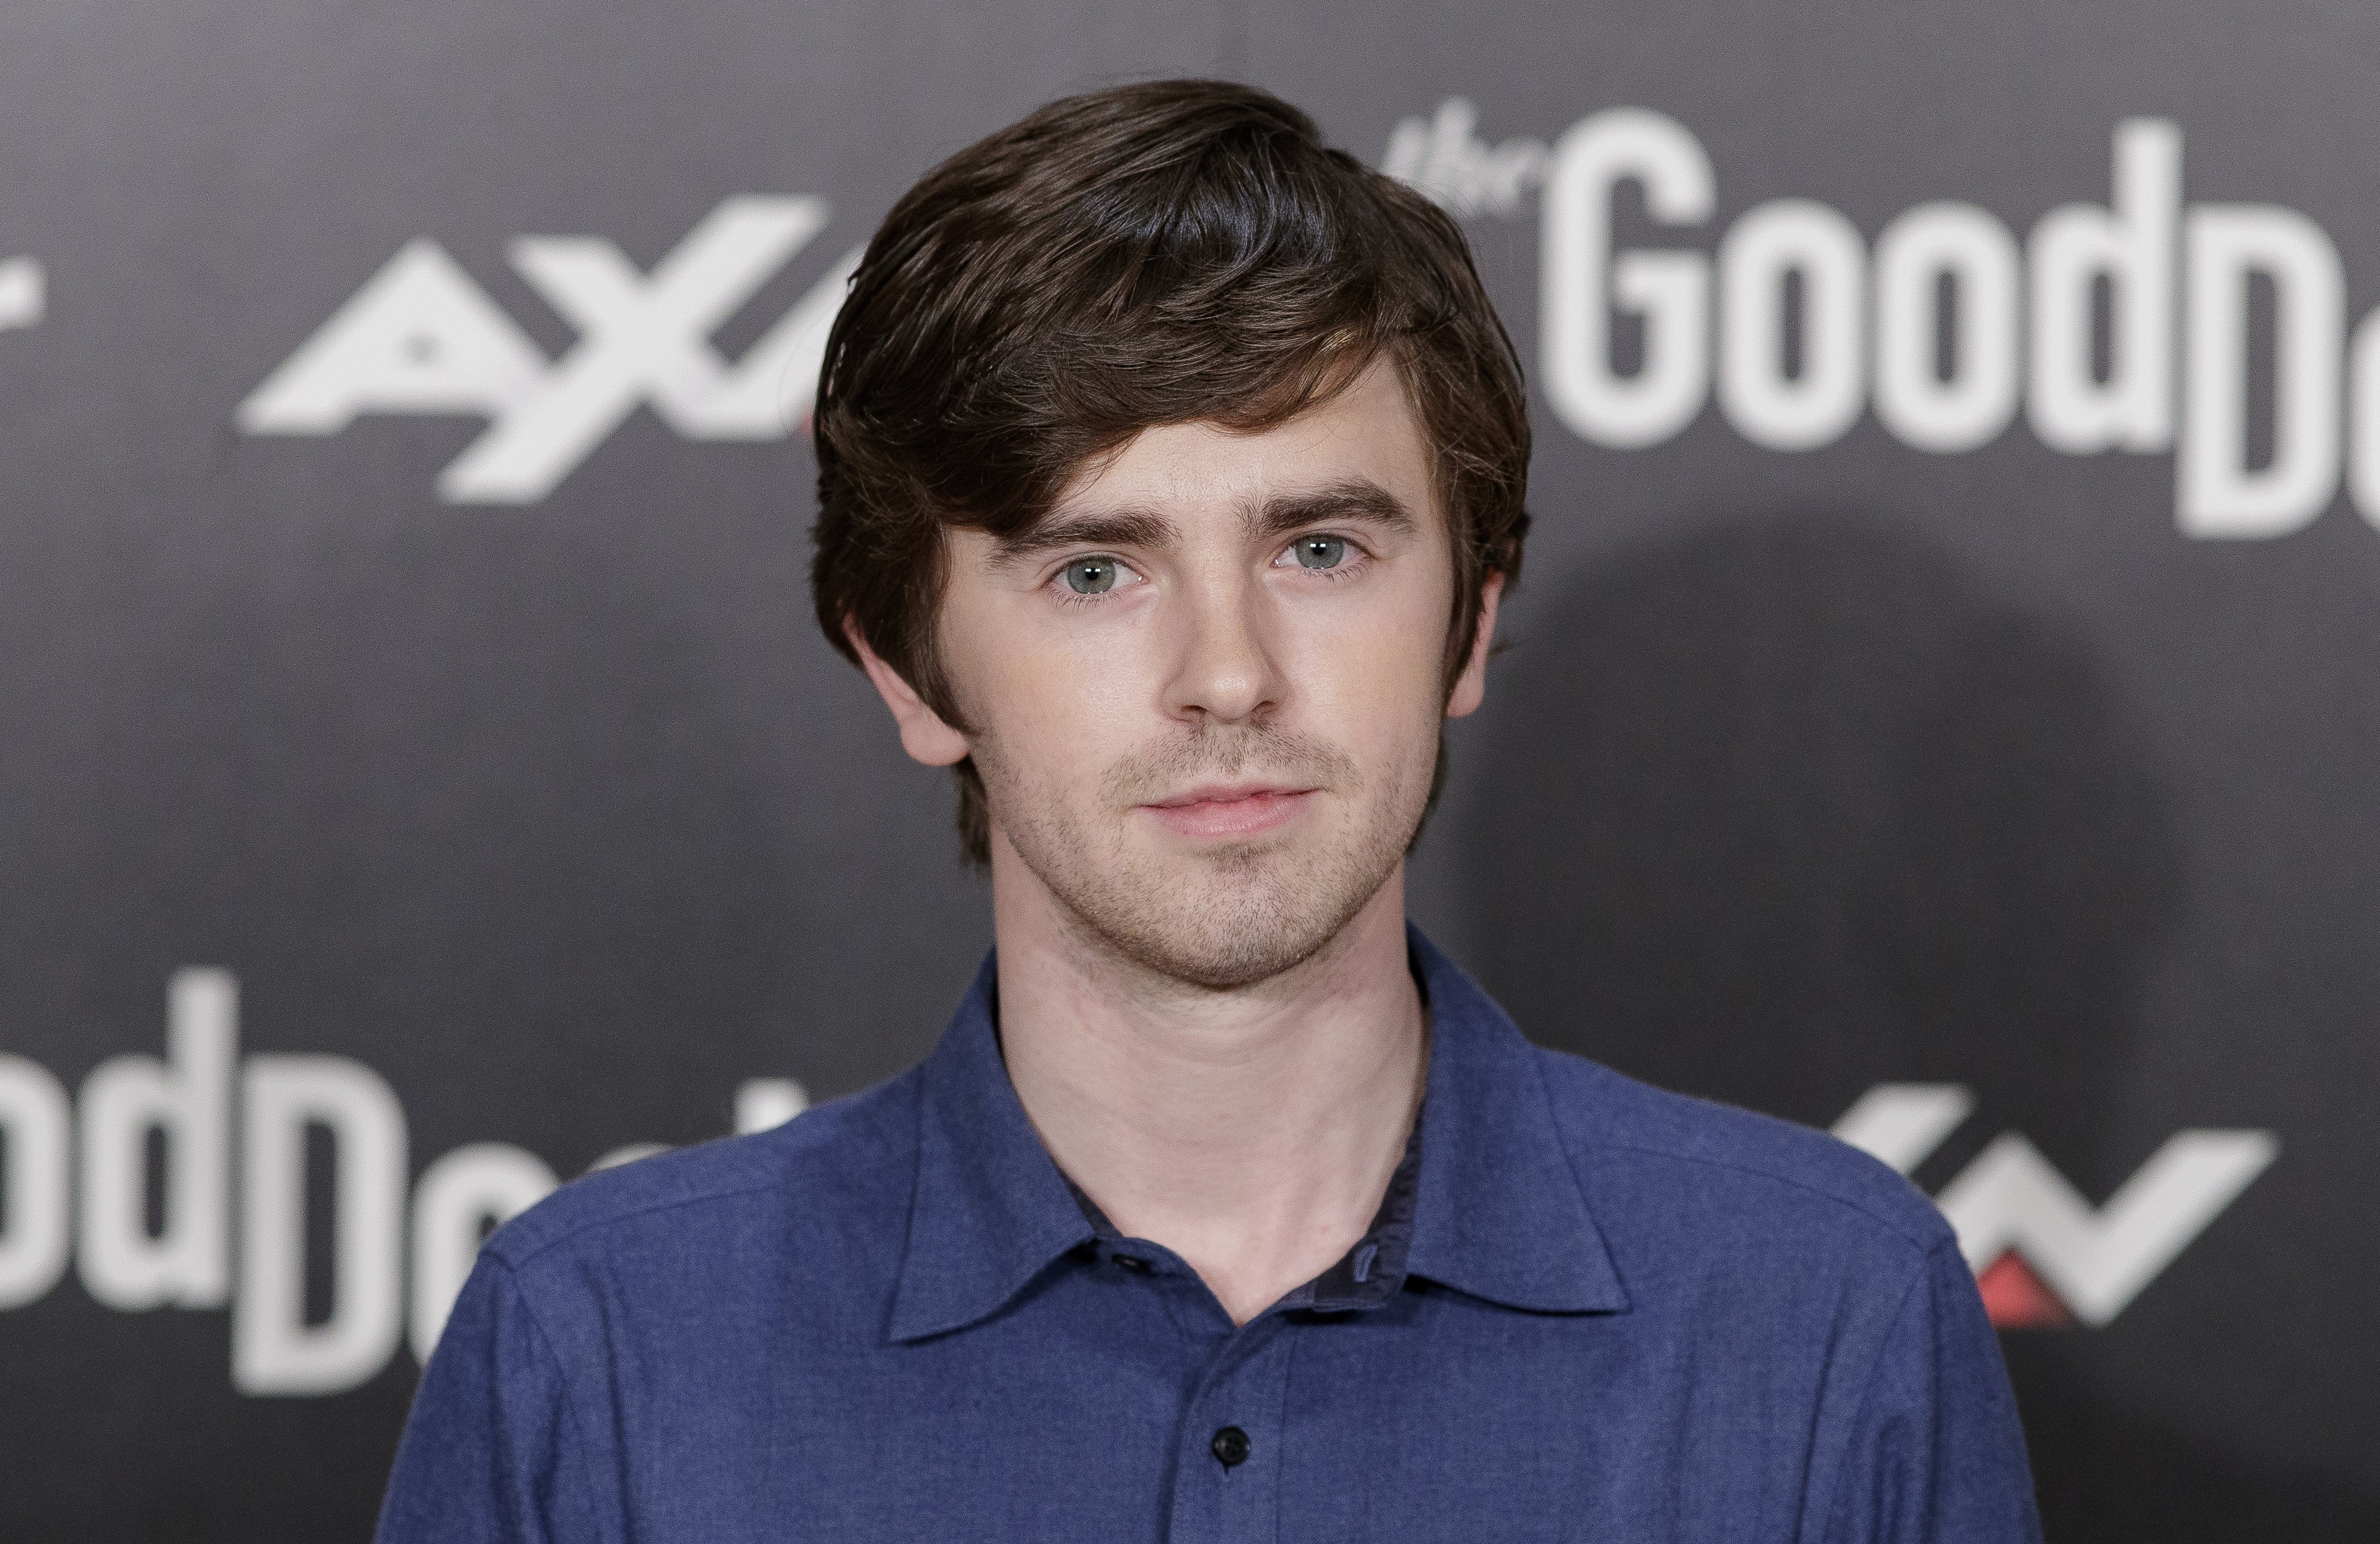 Freddie Highmore attends the "The Good Doctor" photocall in Madrid, Spain on March 26, 2019 | Photo: Getty Images